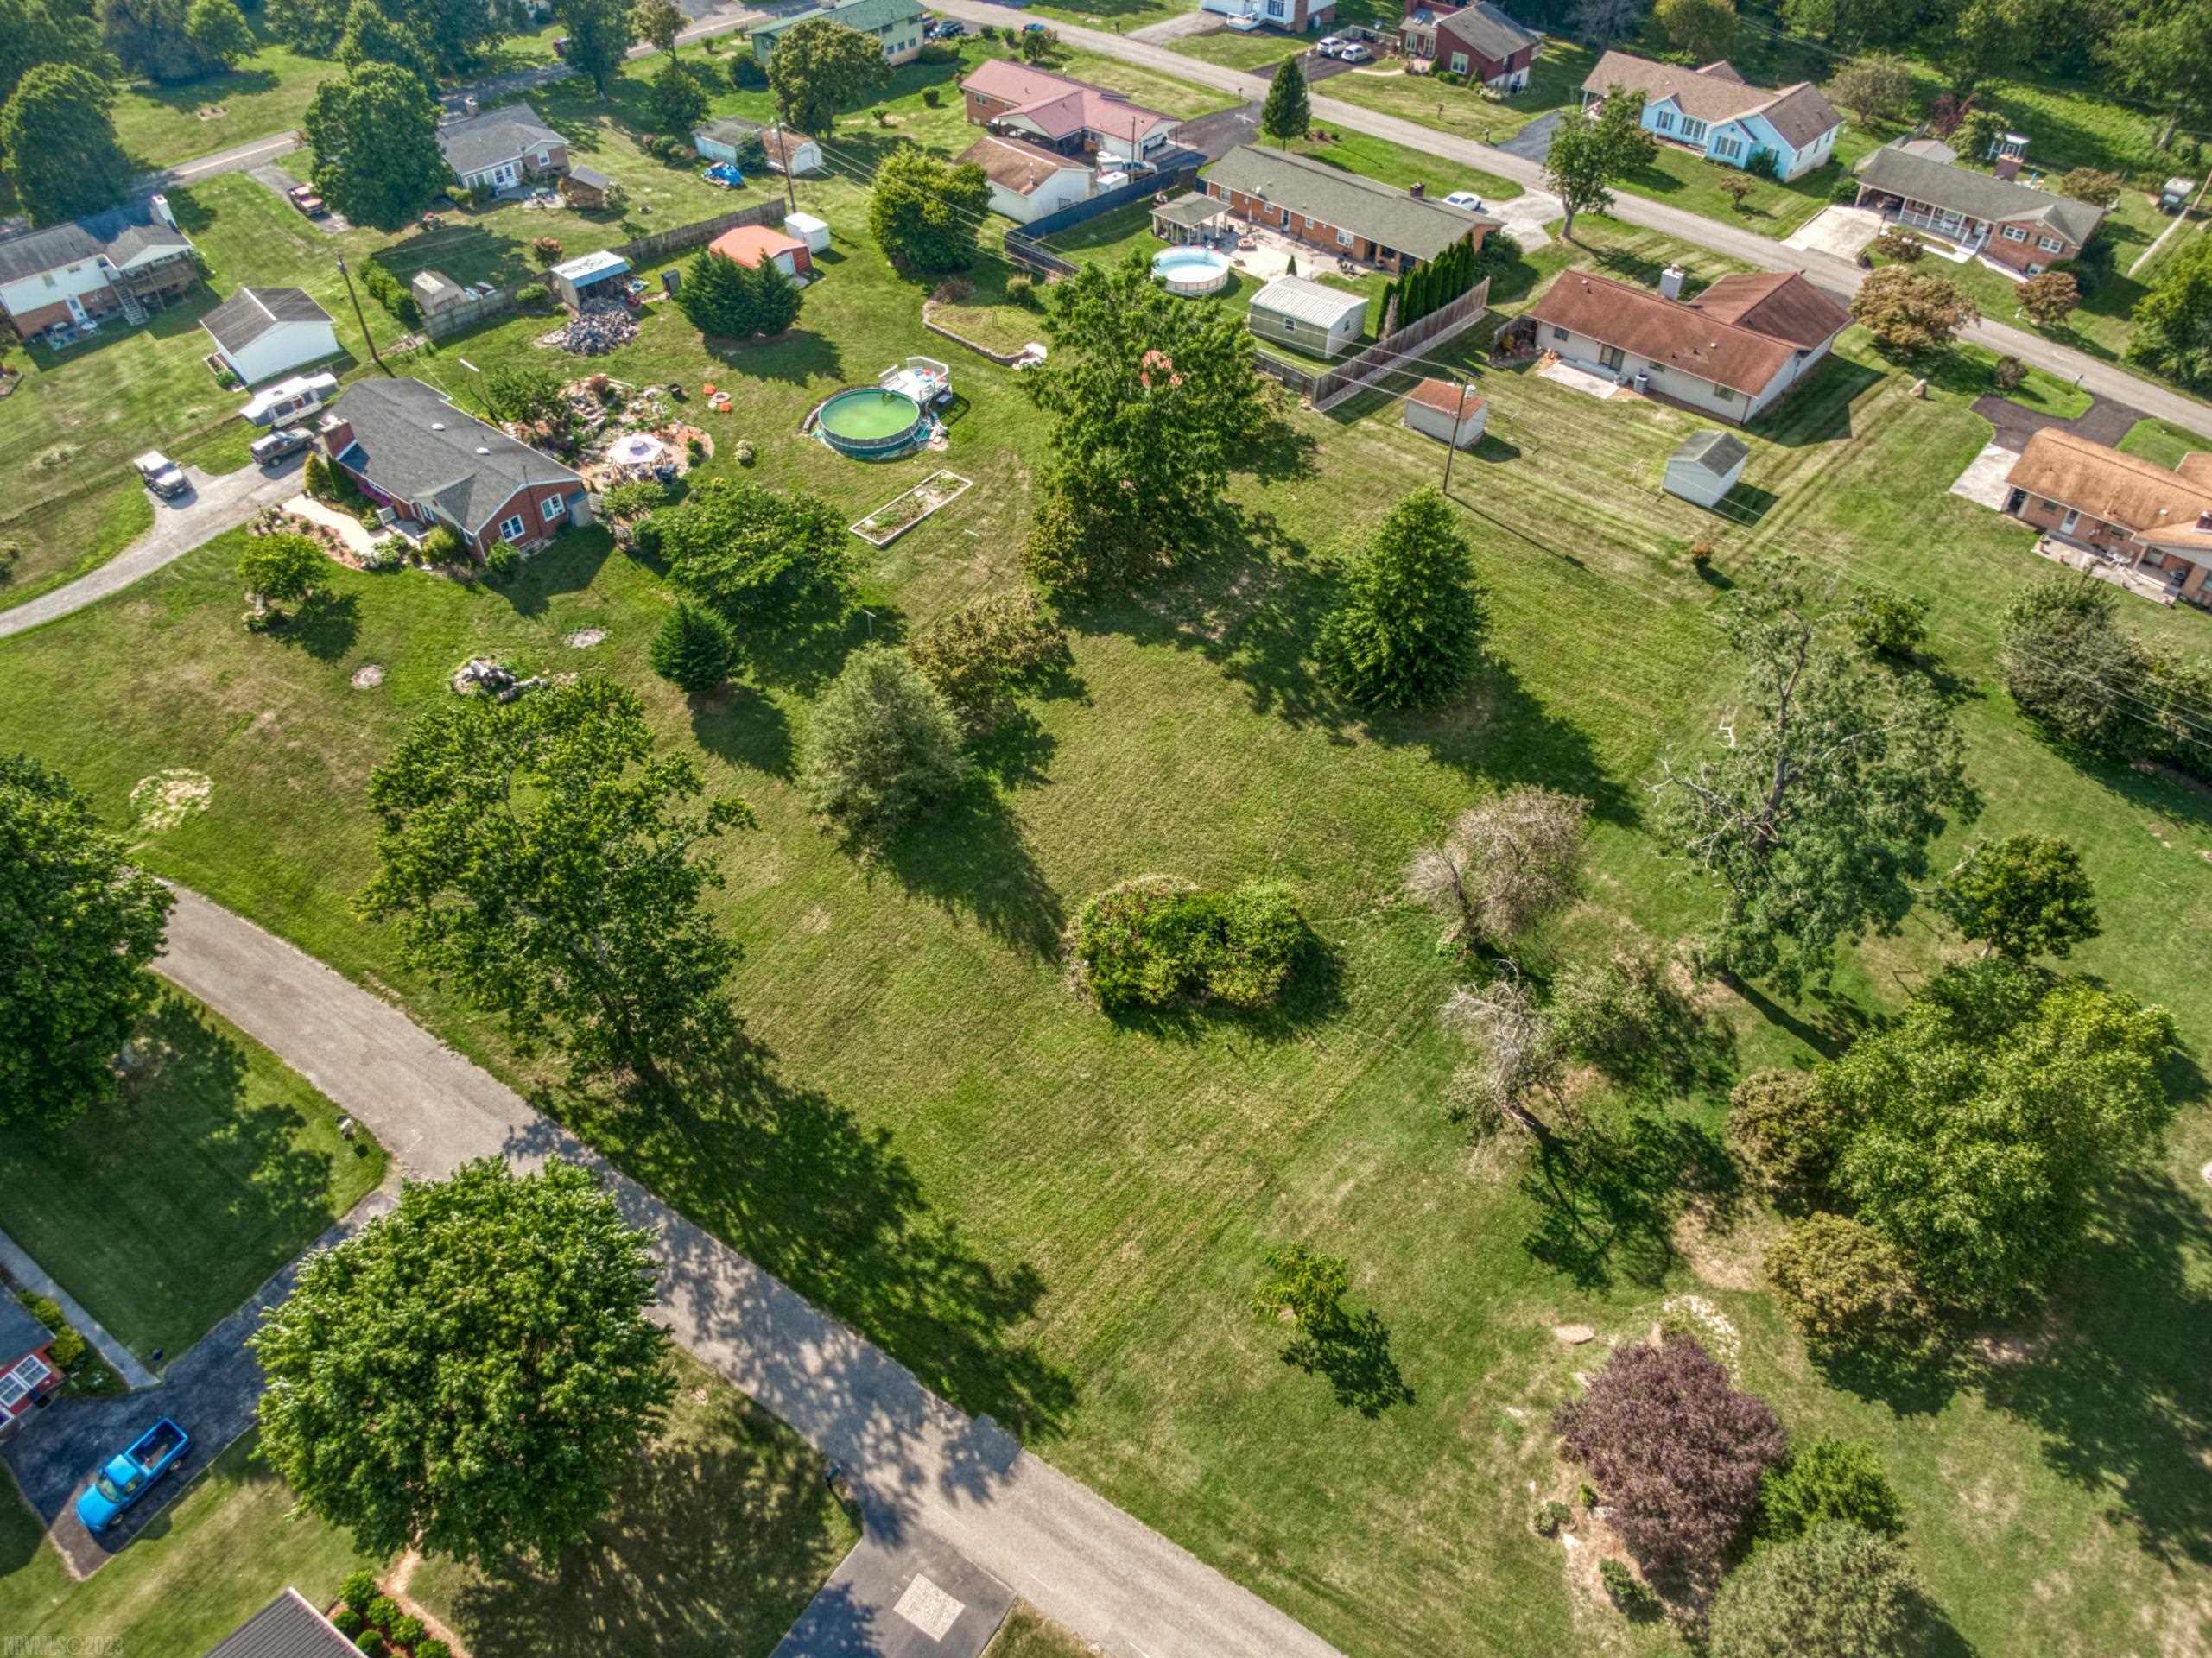 Partially cleared, mostly flat terrain in a serene neighborhood close to town. Perfect canvas for your dream home or investment. Opportunity awaits!